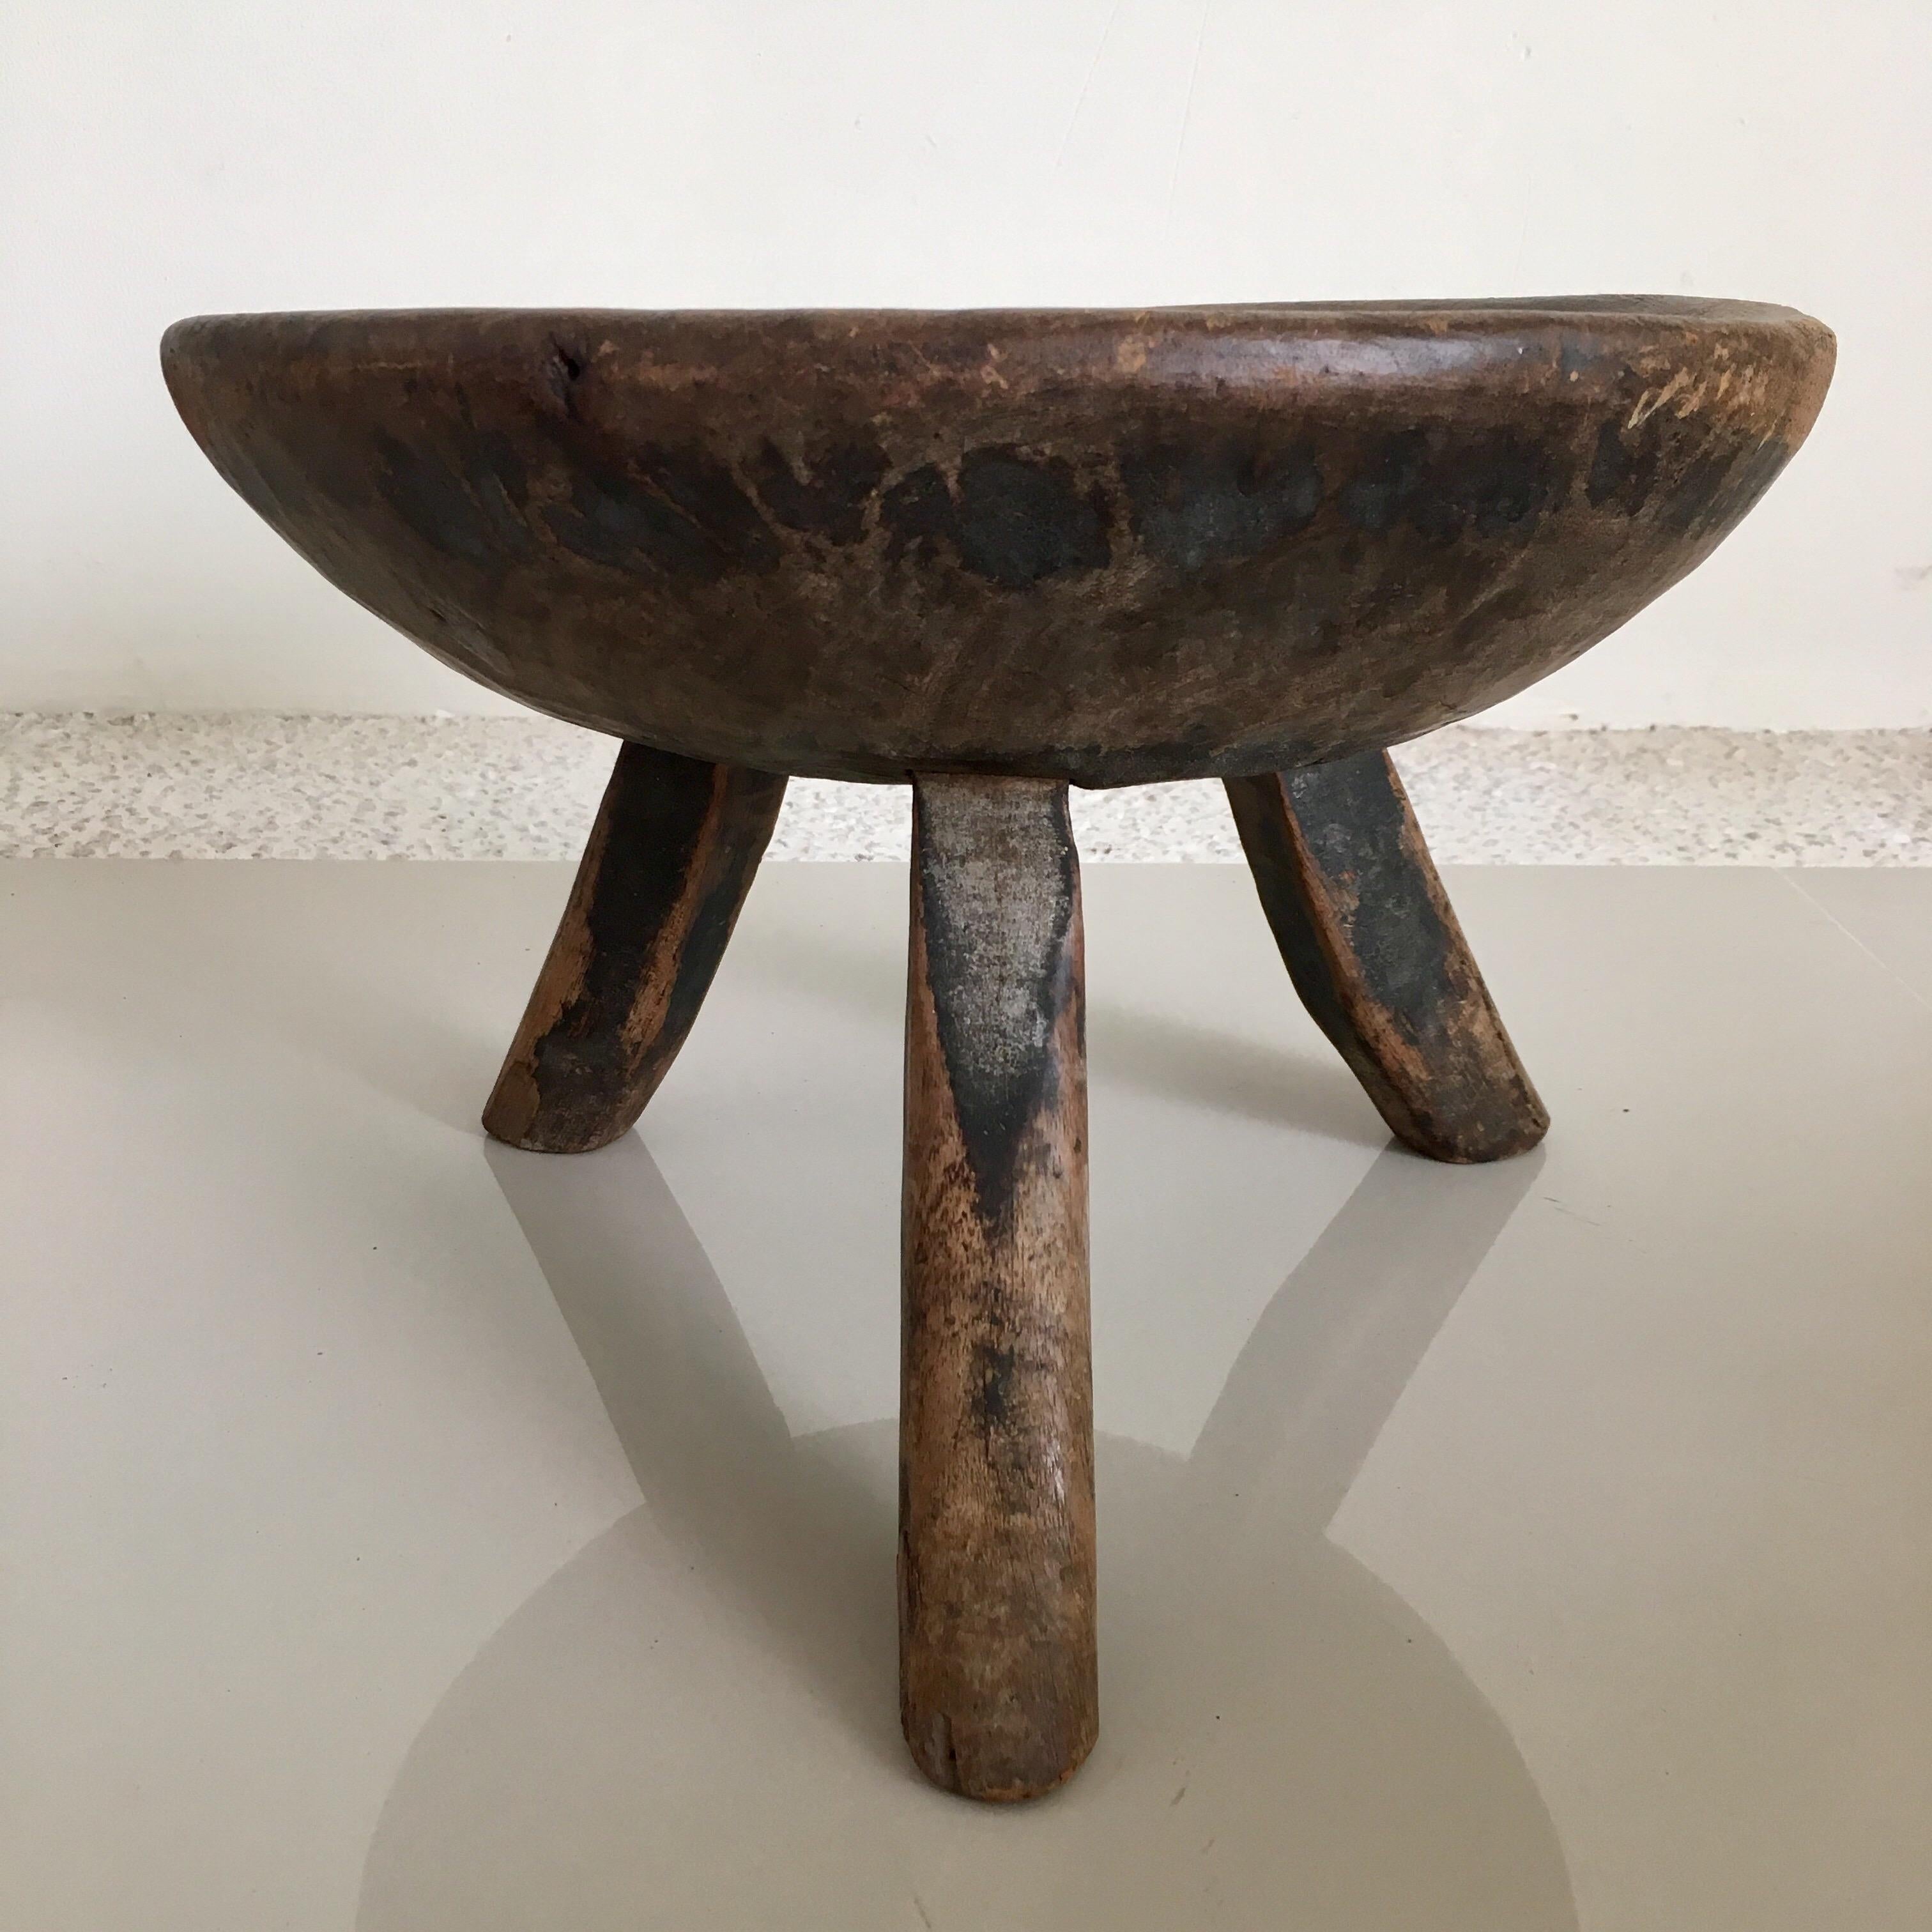 Hand-Carved Dome Stool from Mexico